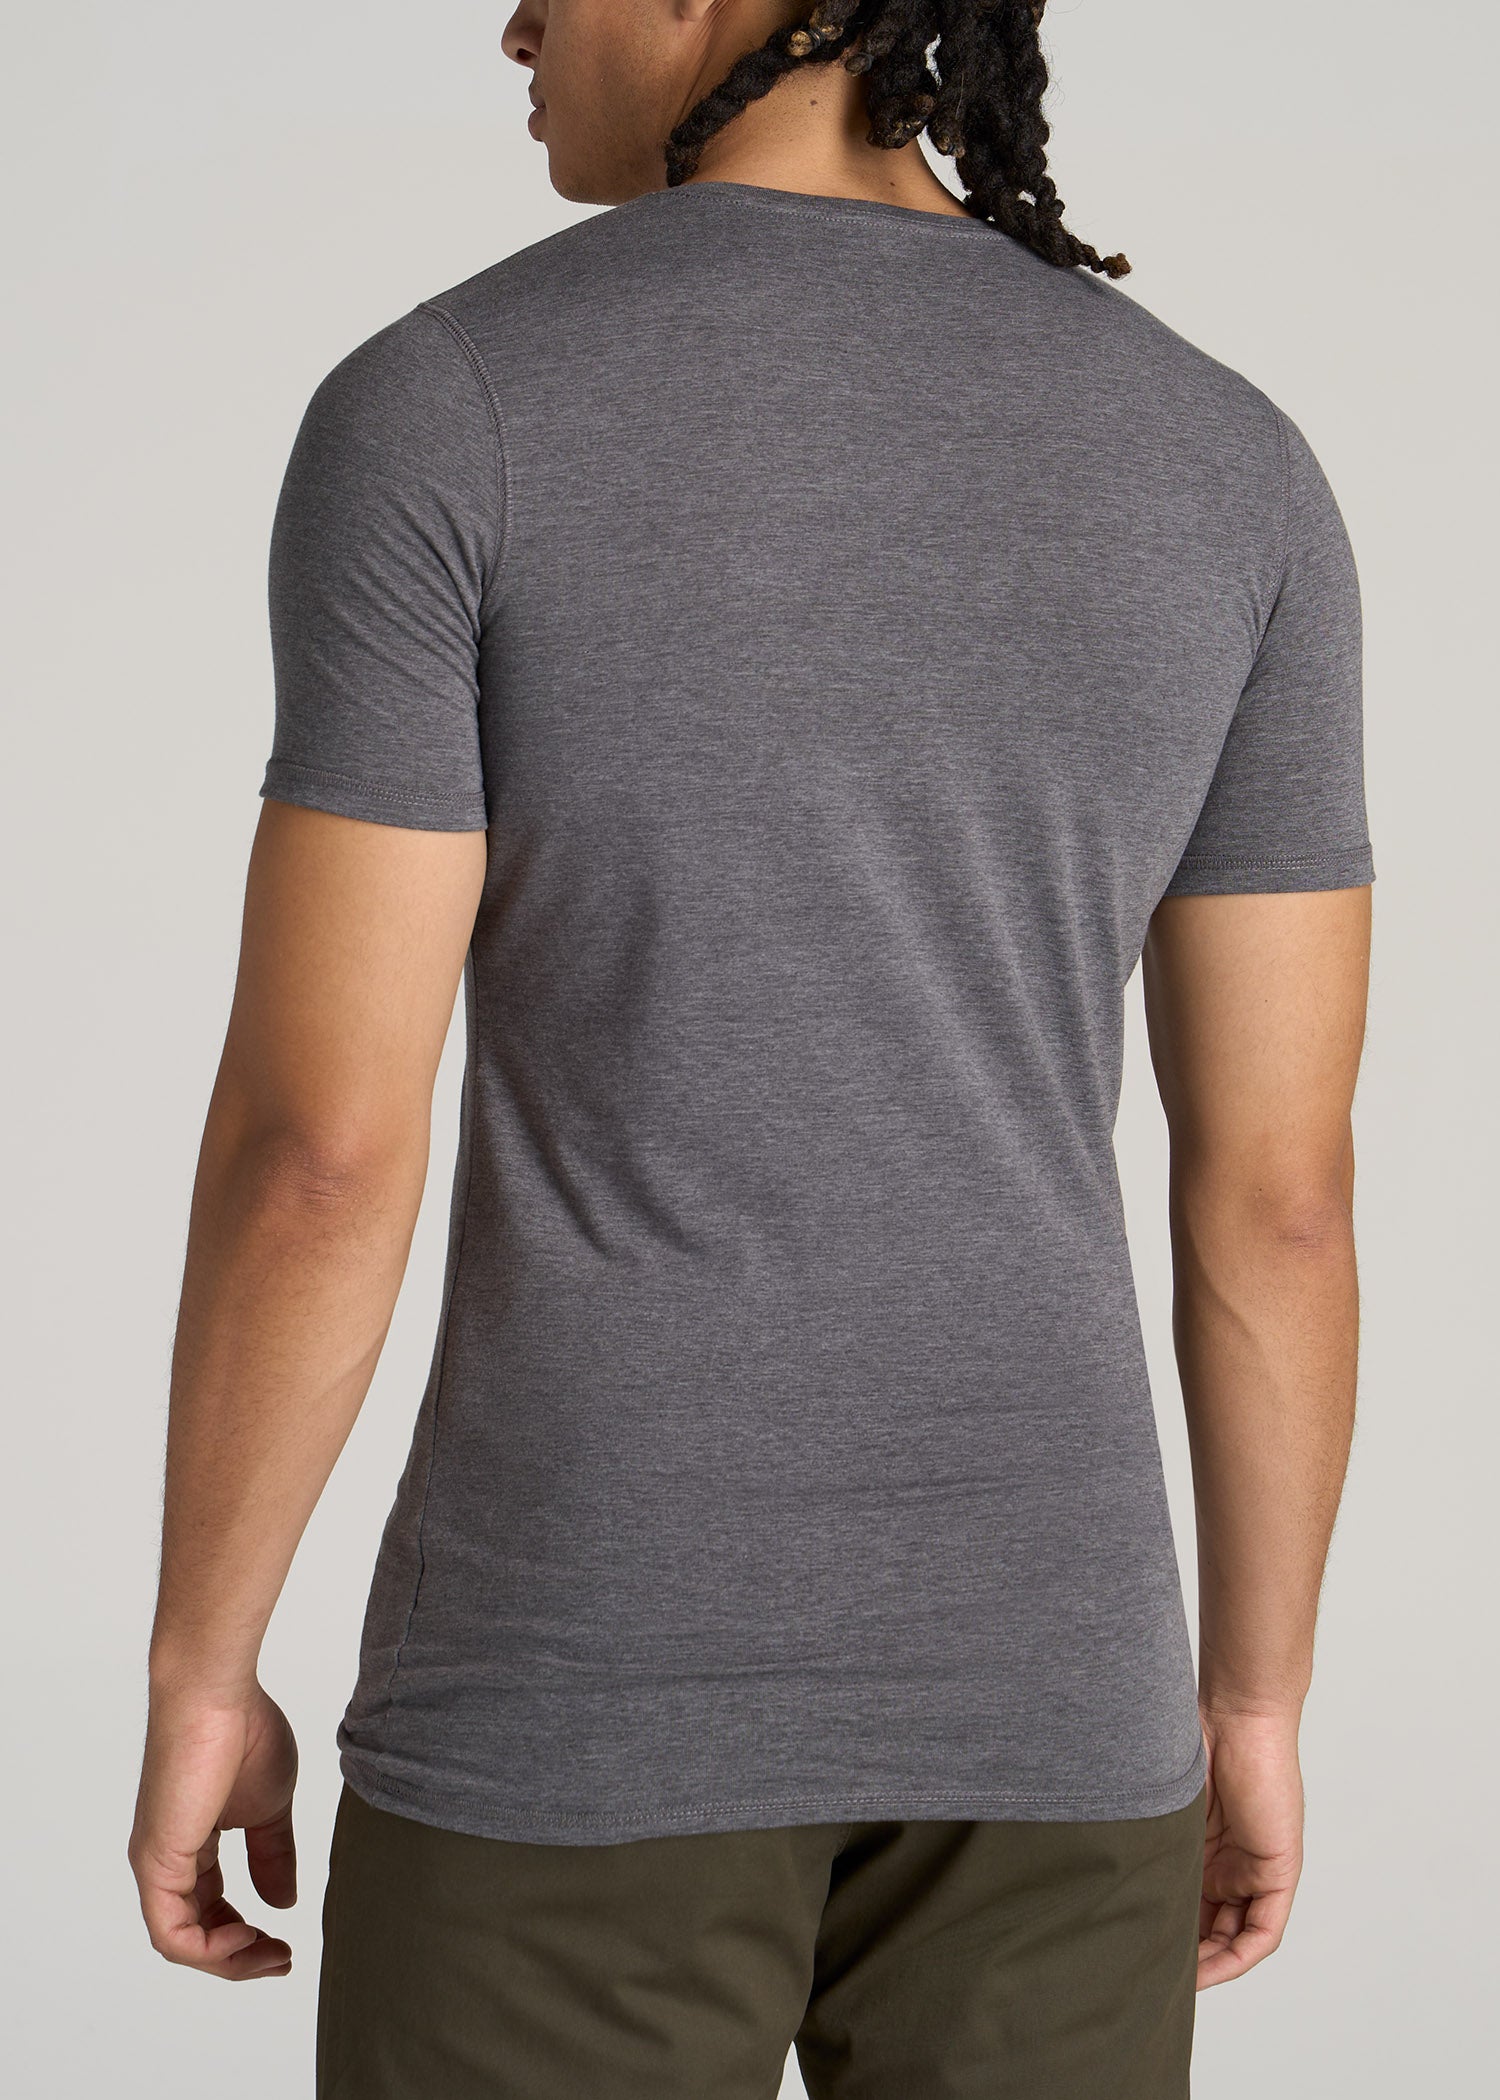    American-Tall-Men-Essential-SLIM-FIT-V-Neck-Tees-Charocal-Mix-back